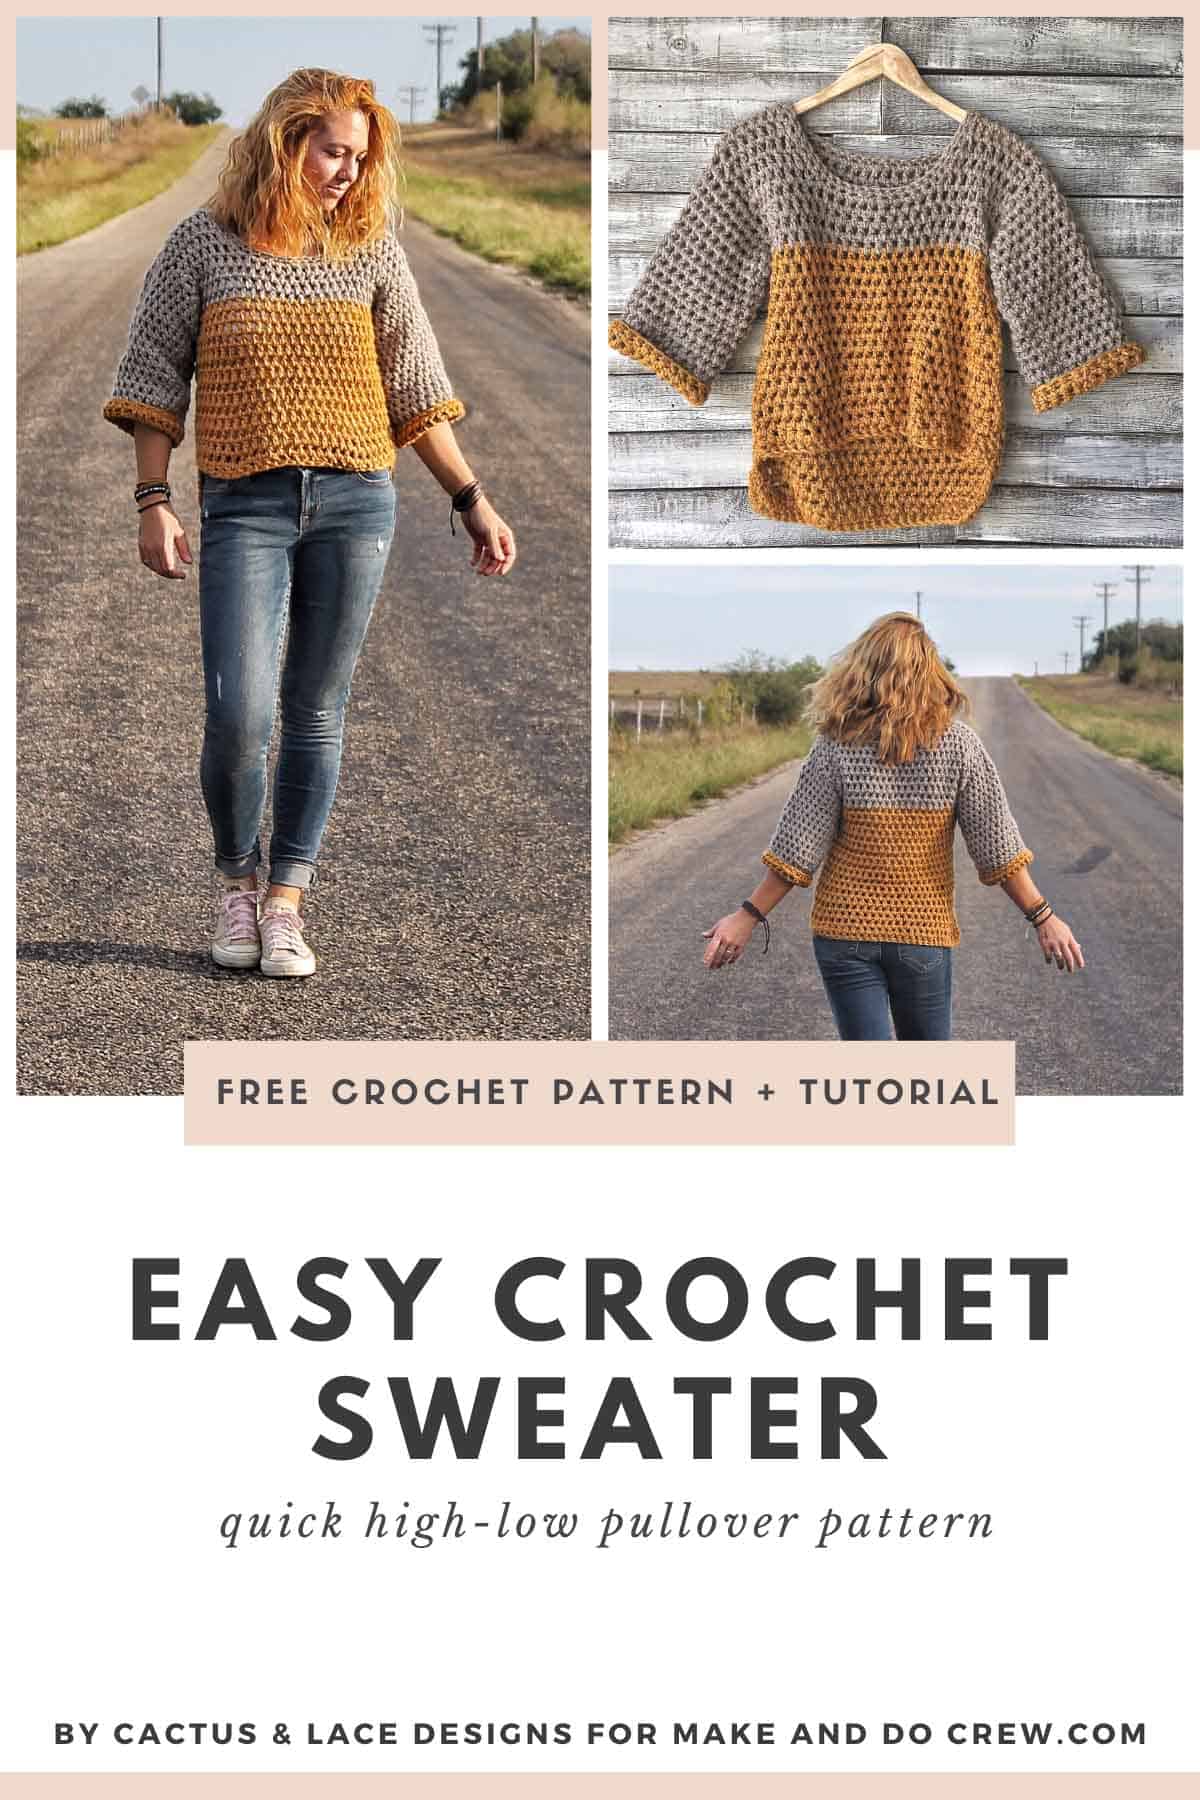 Free crochet pattern for an easy pullover cropped sweater with 3/4 length sleeves using Lion Brand yarn. 